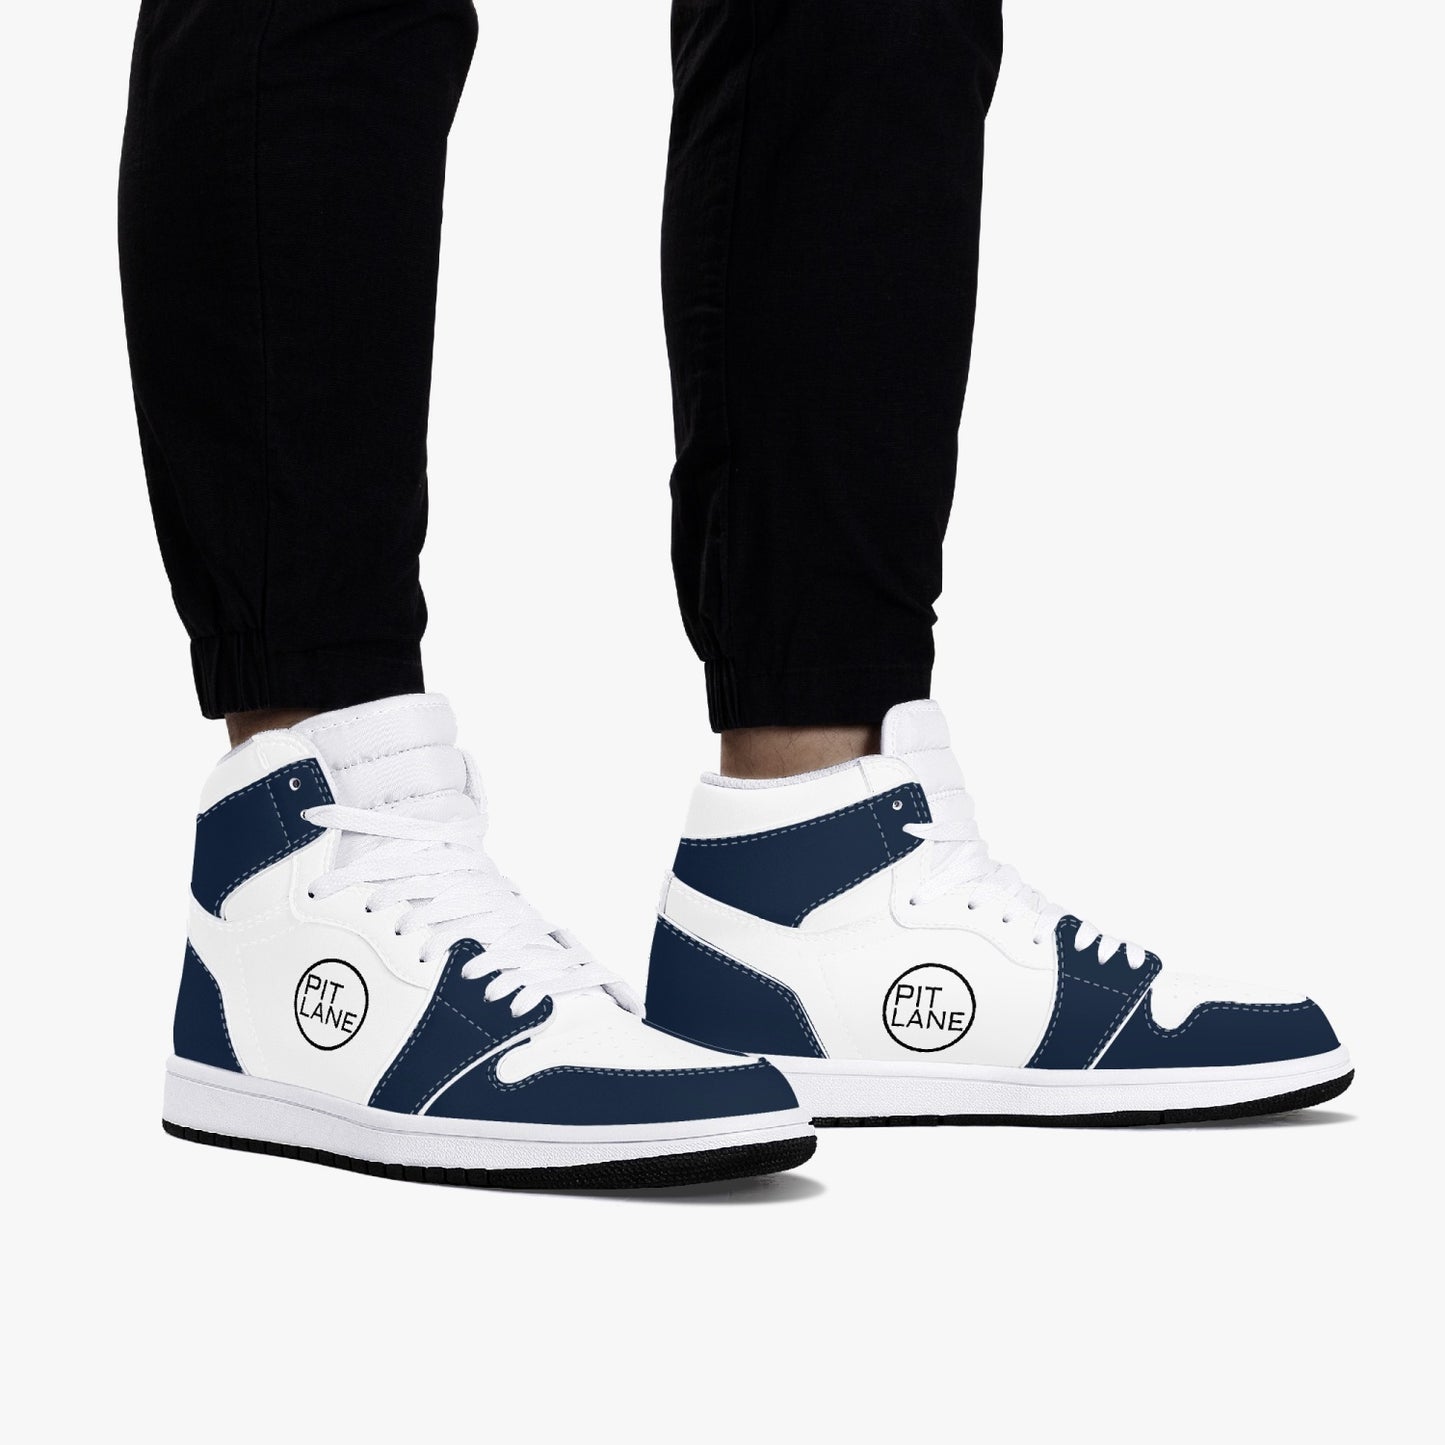 PIT LANE CLOTHING High-Top Leather Sneakers - Dark Navy